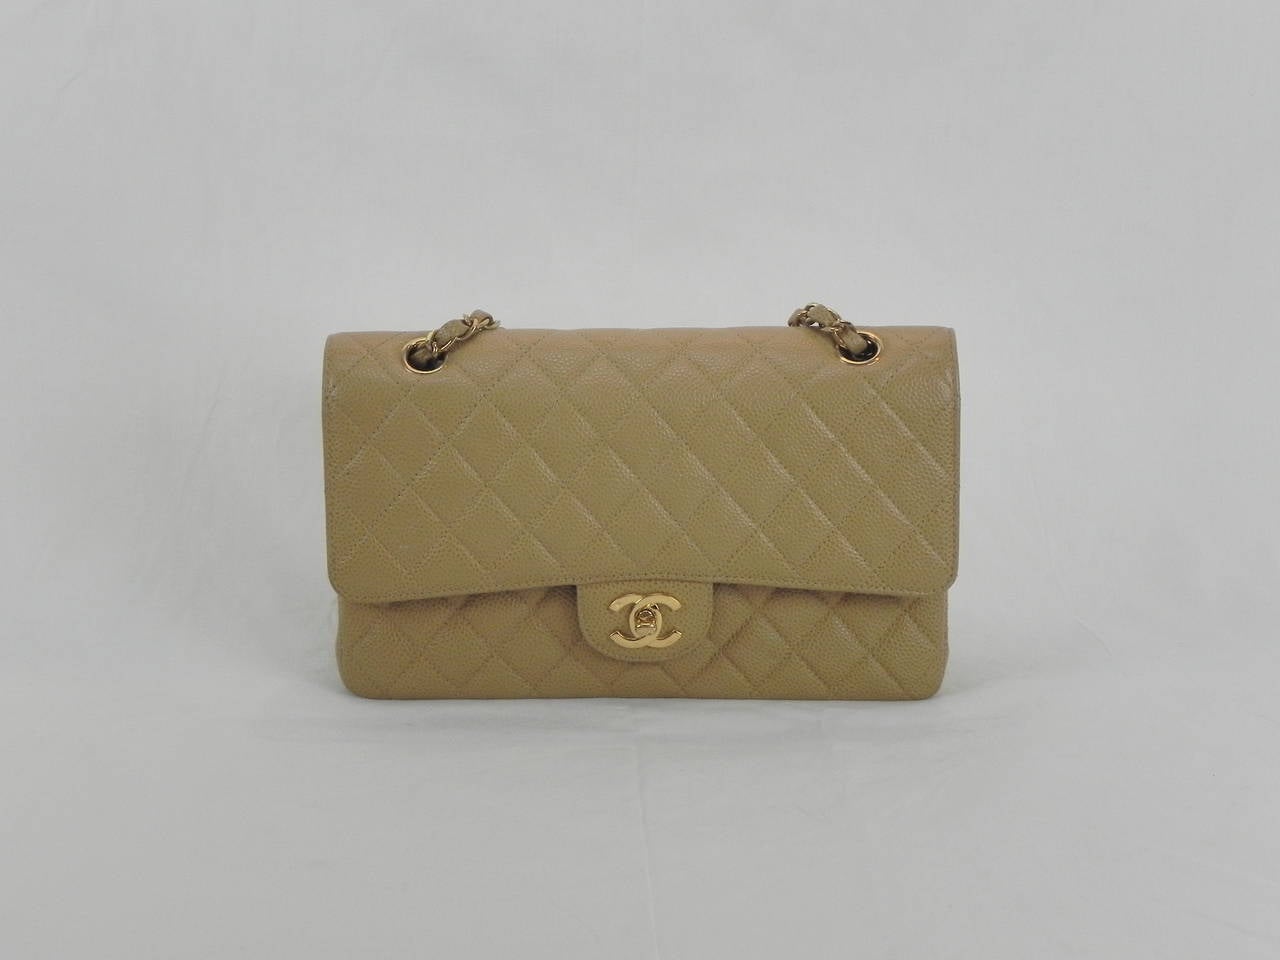 Chanel Classic Caviar 25.5 Beige Party Bag .
Circa 2003-2004 in Pristine Condition .
Interior and Exterior is Flawless and the perfect bag for Spring ,Summer & Fall !!
Dimensions are 10 L x 3w x 7 H Shoulder drop 15 inches .
Comes with the